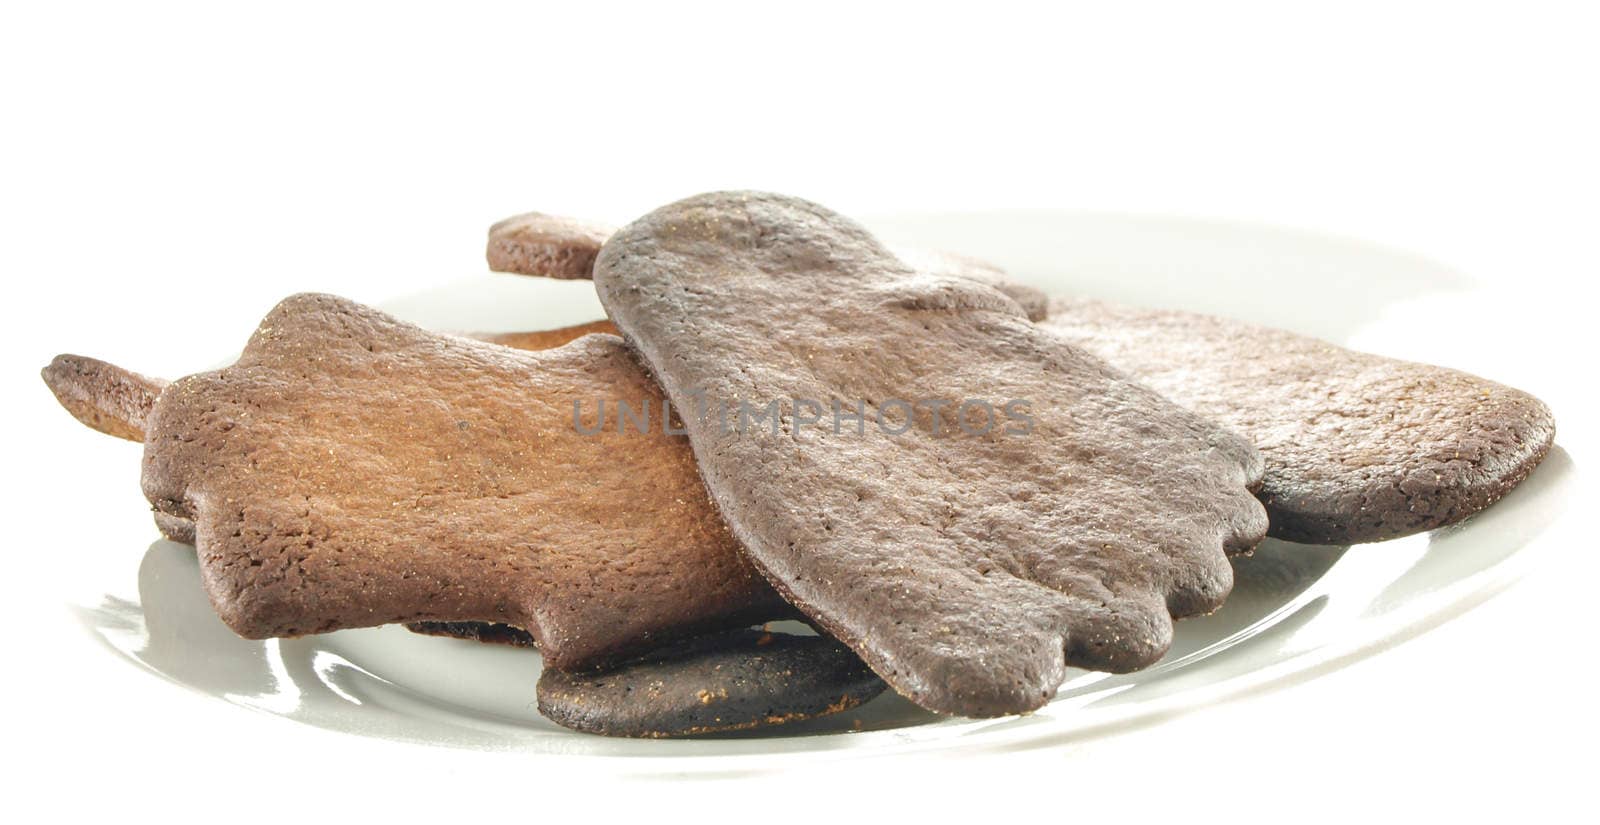 Burned gingerbread on white plate by Arvebettum